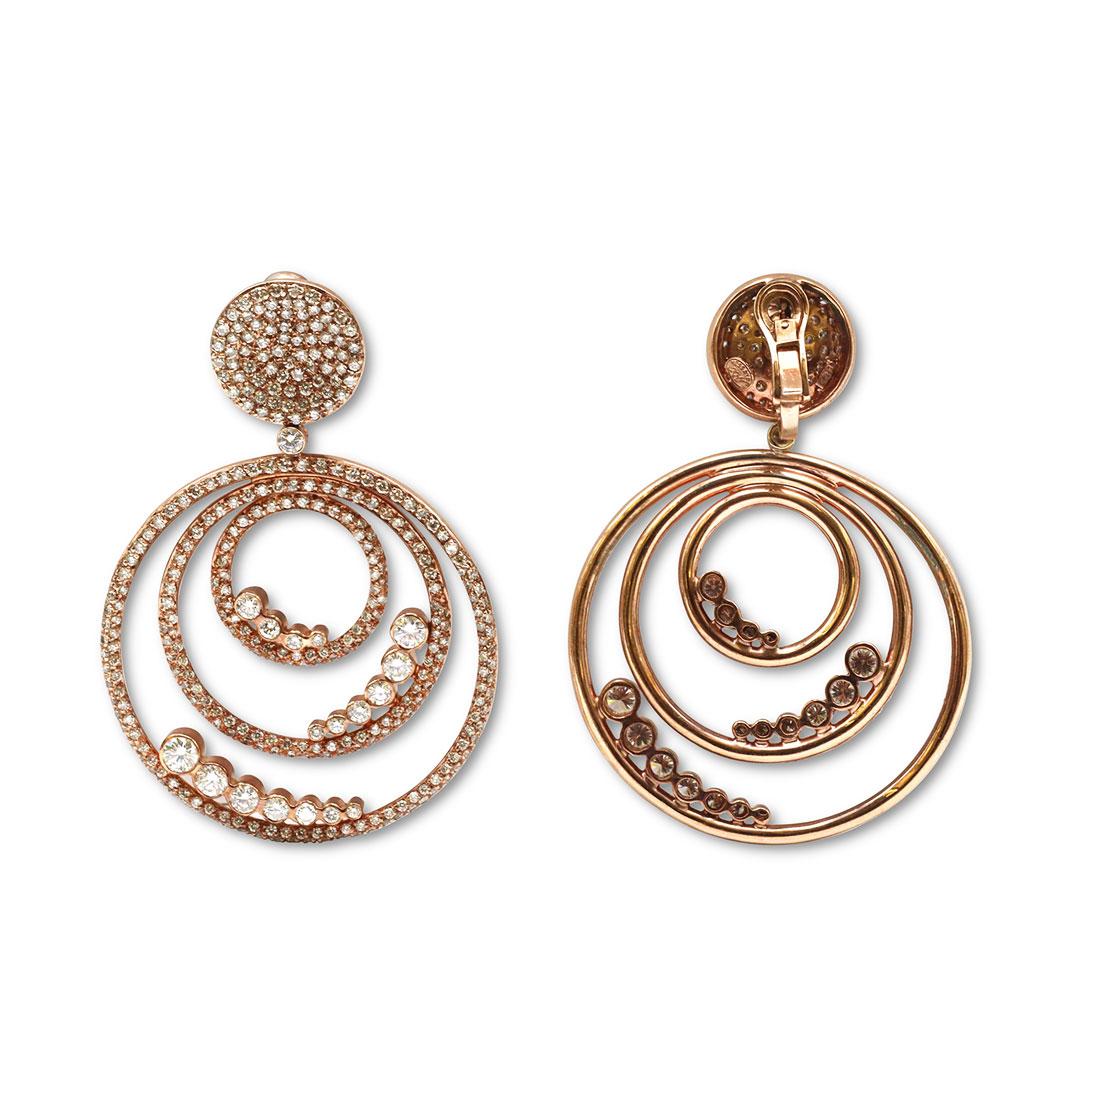 A stunning pair of chandelier earrings crafted in 18 karat rose gold. These earrings are designed as tangent circles set with an estimated 21.50 carats of glittering round brilliant cut diamonds (GH, VS, SI).
The earrings measure 2.86 inches in